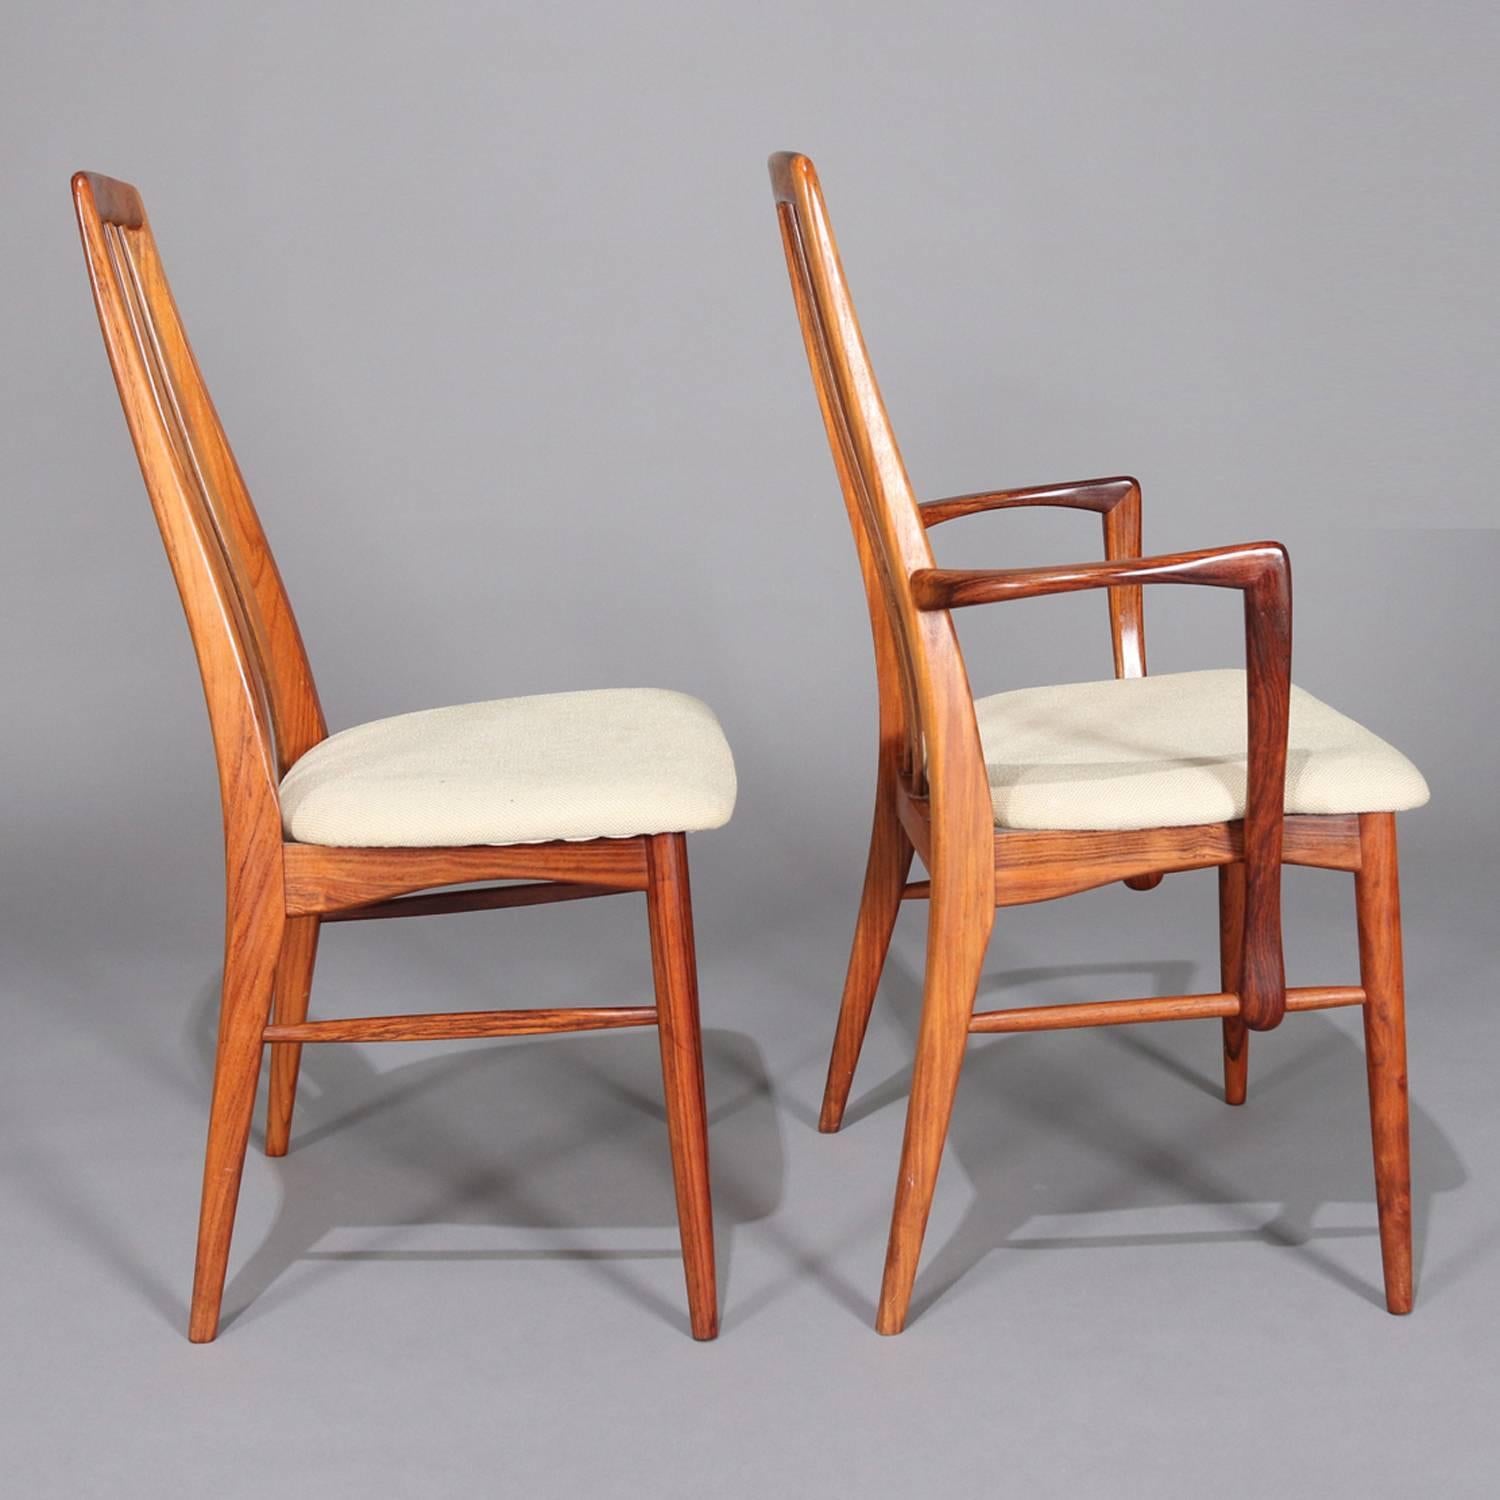 20th Century Midcentury Danish Modern Sculpted Rosewood Dining Table & Six Chairs, circa 1960